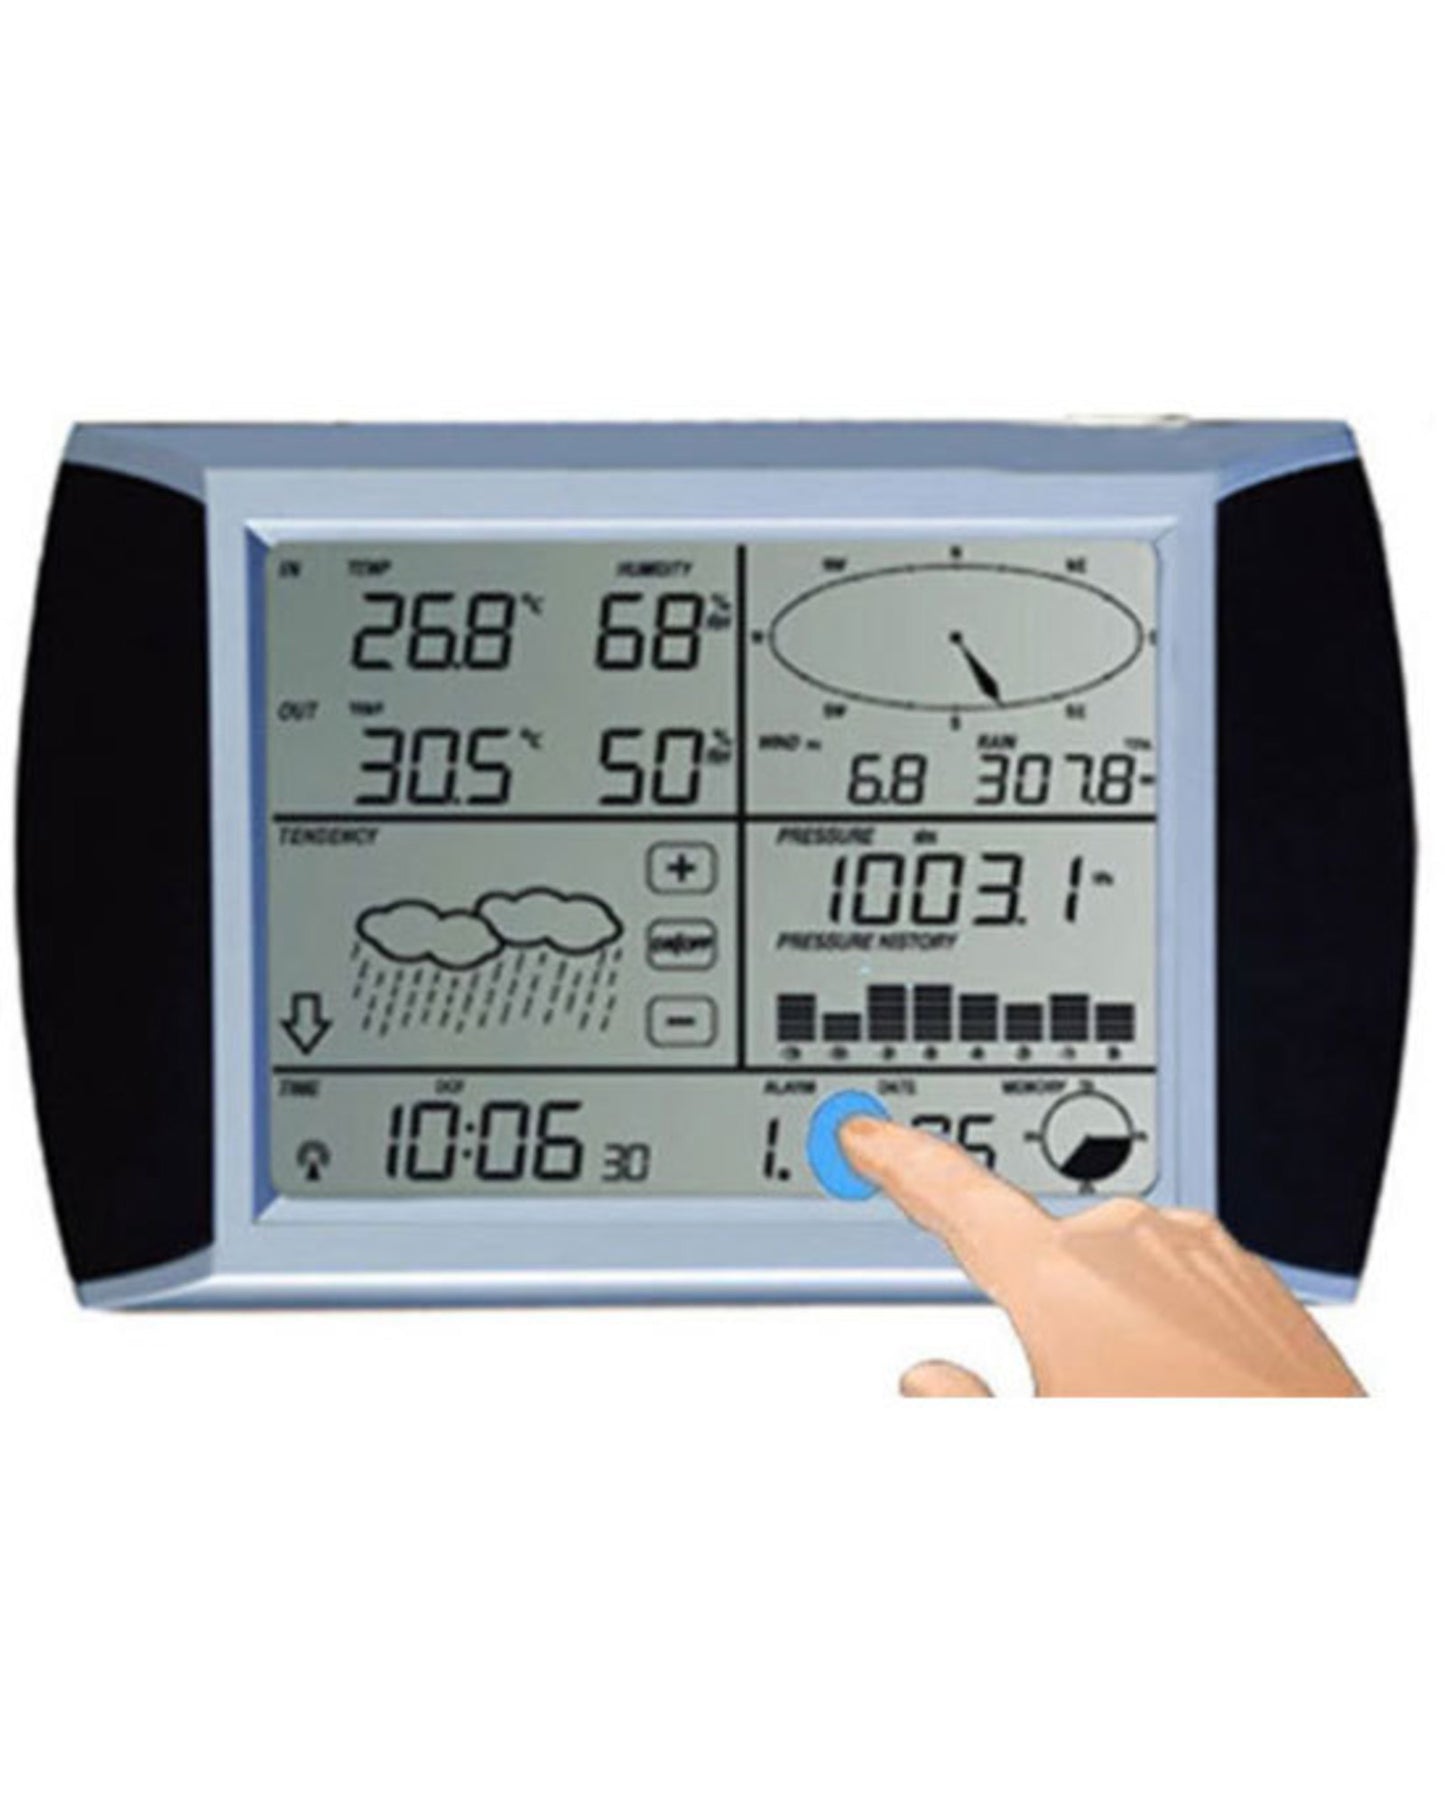 WS1081 Ver3 TESA Solar Powered Touch Panel Weather Center with PC interface